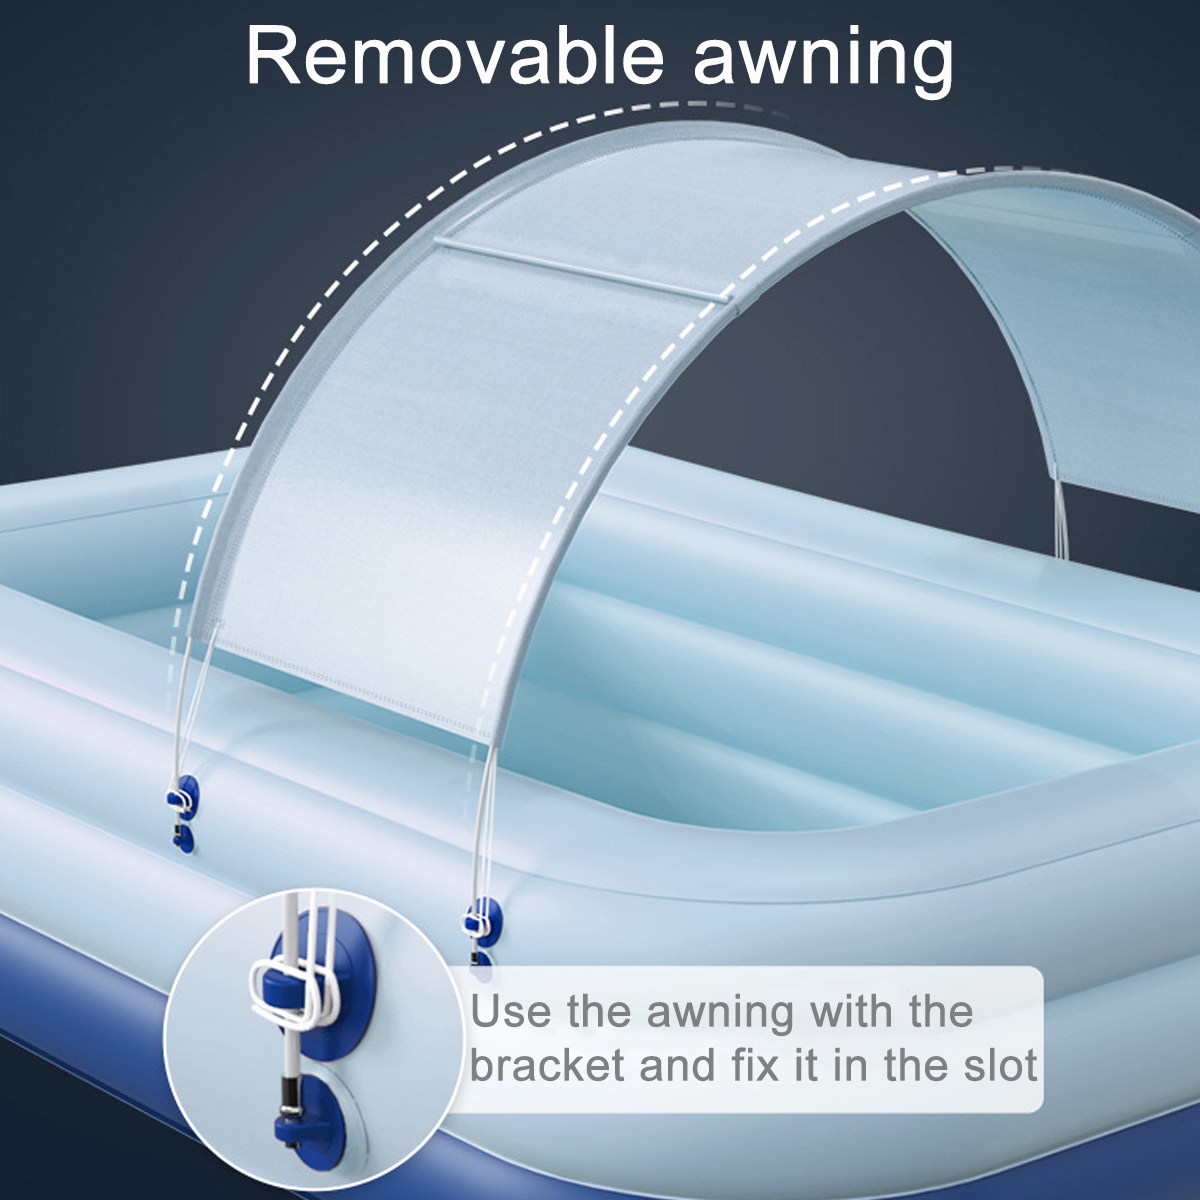 10Ft-Automatic-Inflatable-Swimming-Pool-Family-Bath-Pools-Paddling-Pools-with-Sunshade-Outdoor-Garde-1857043-5